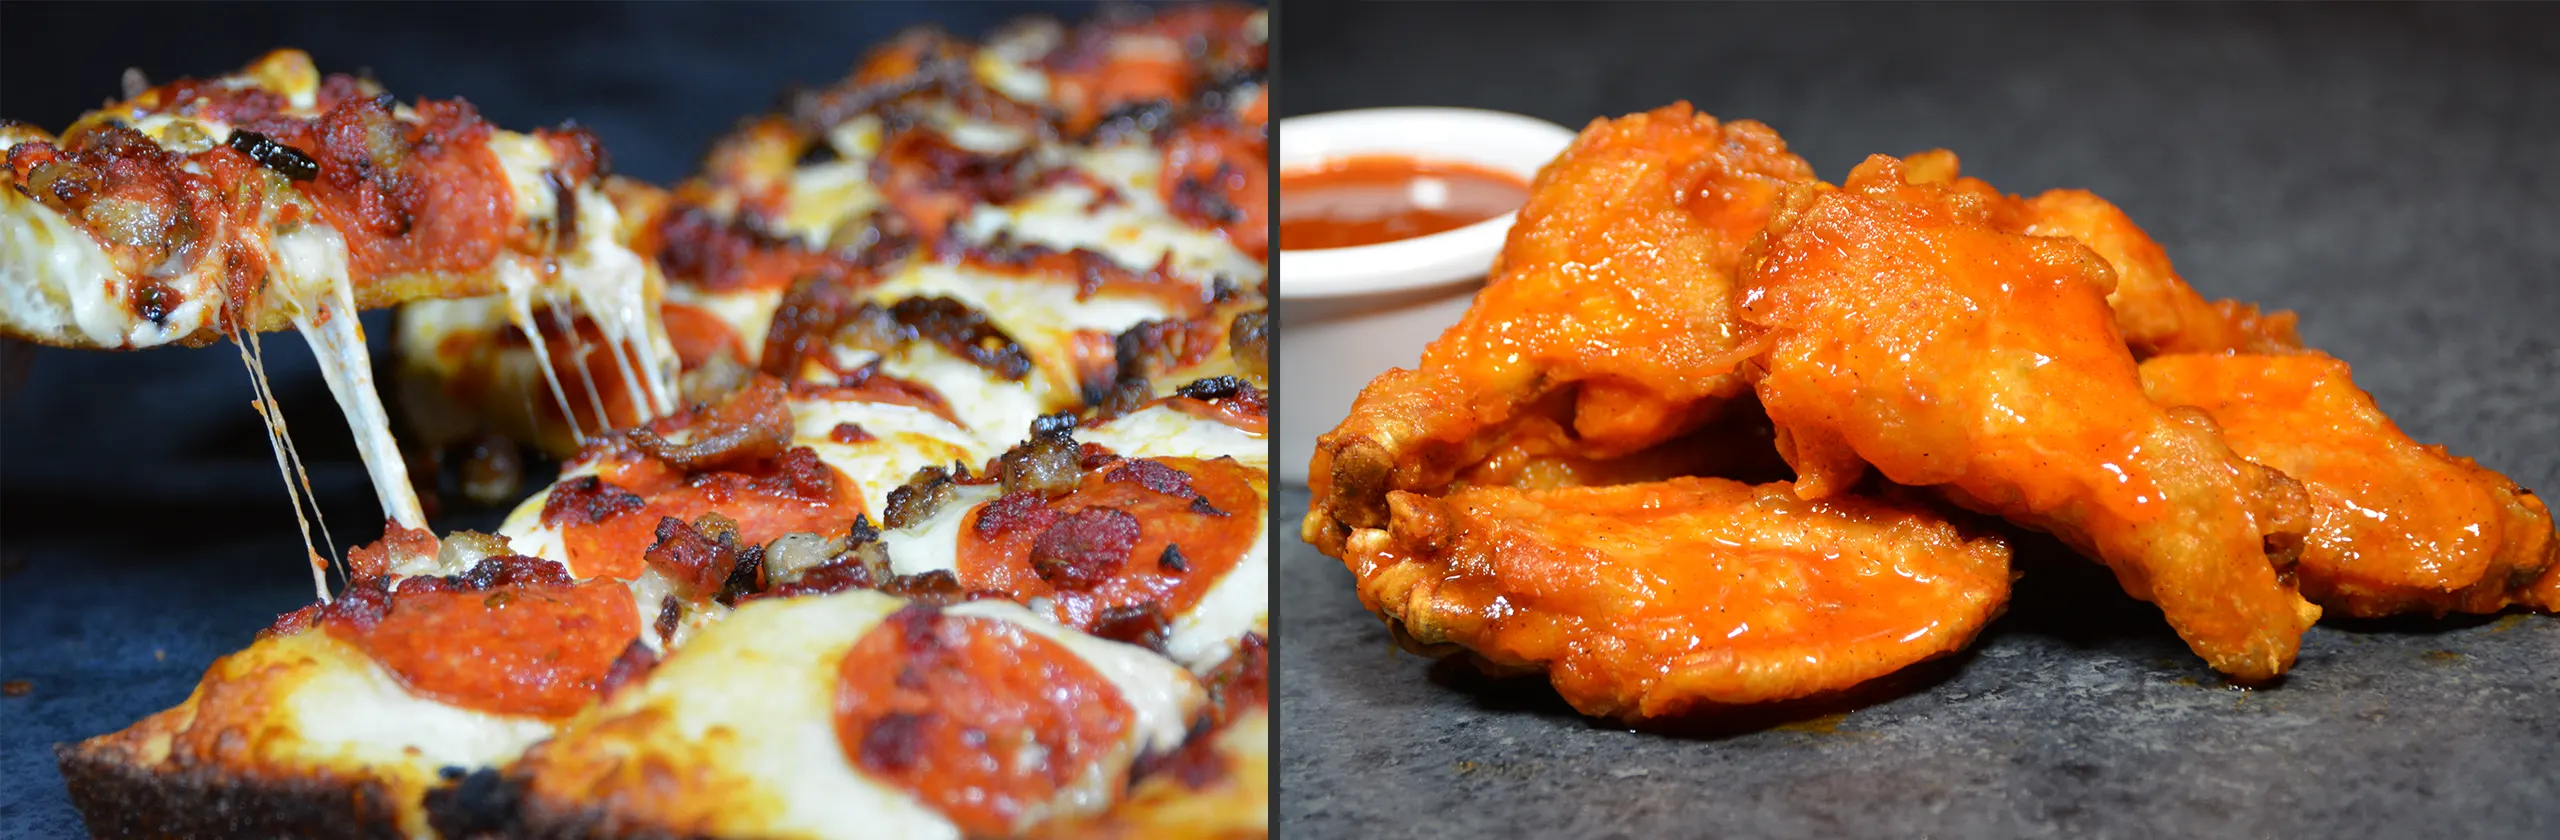 Banner image displaying pizza and wings